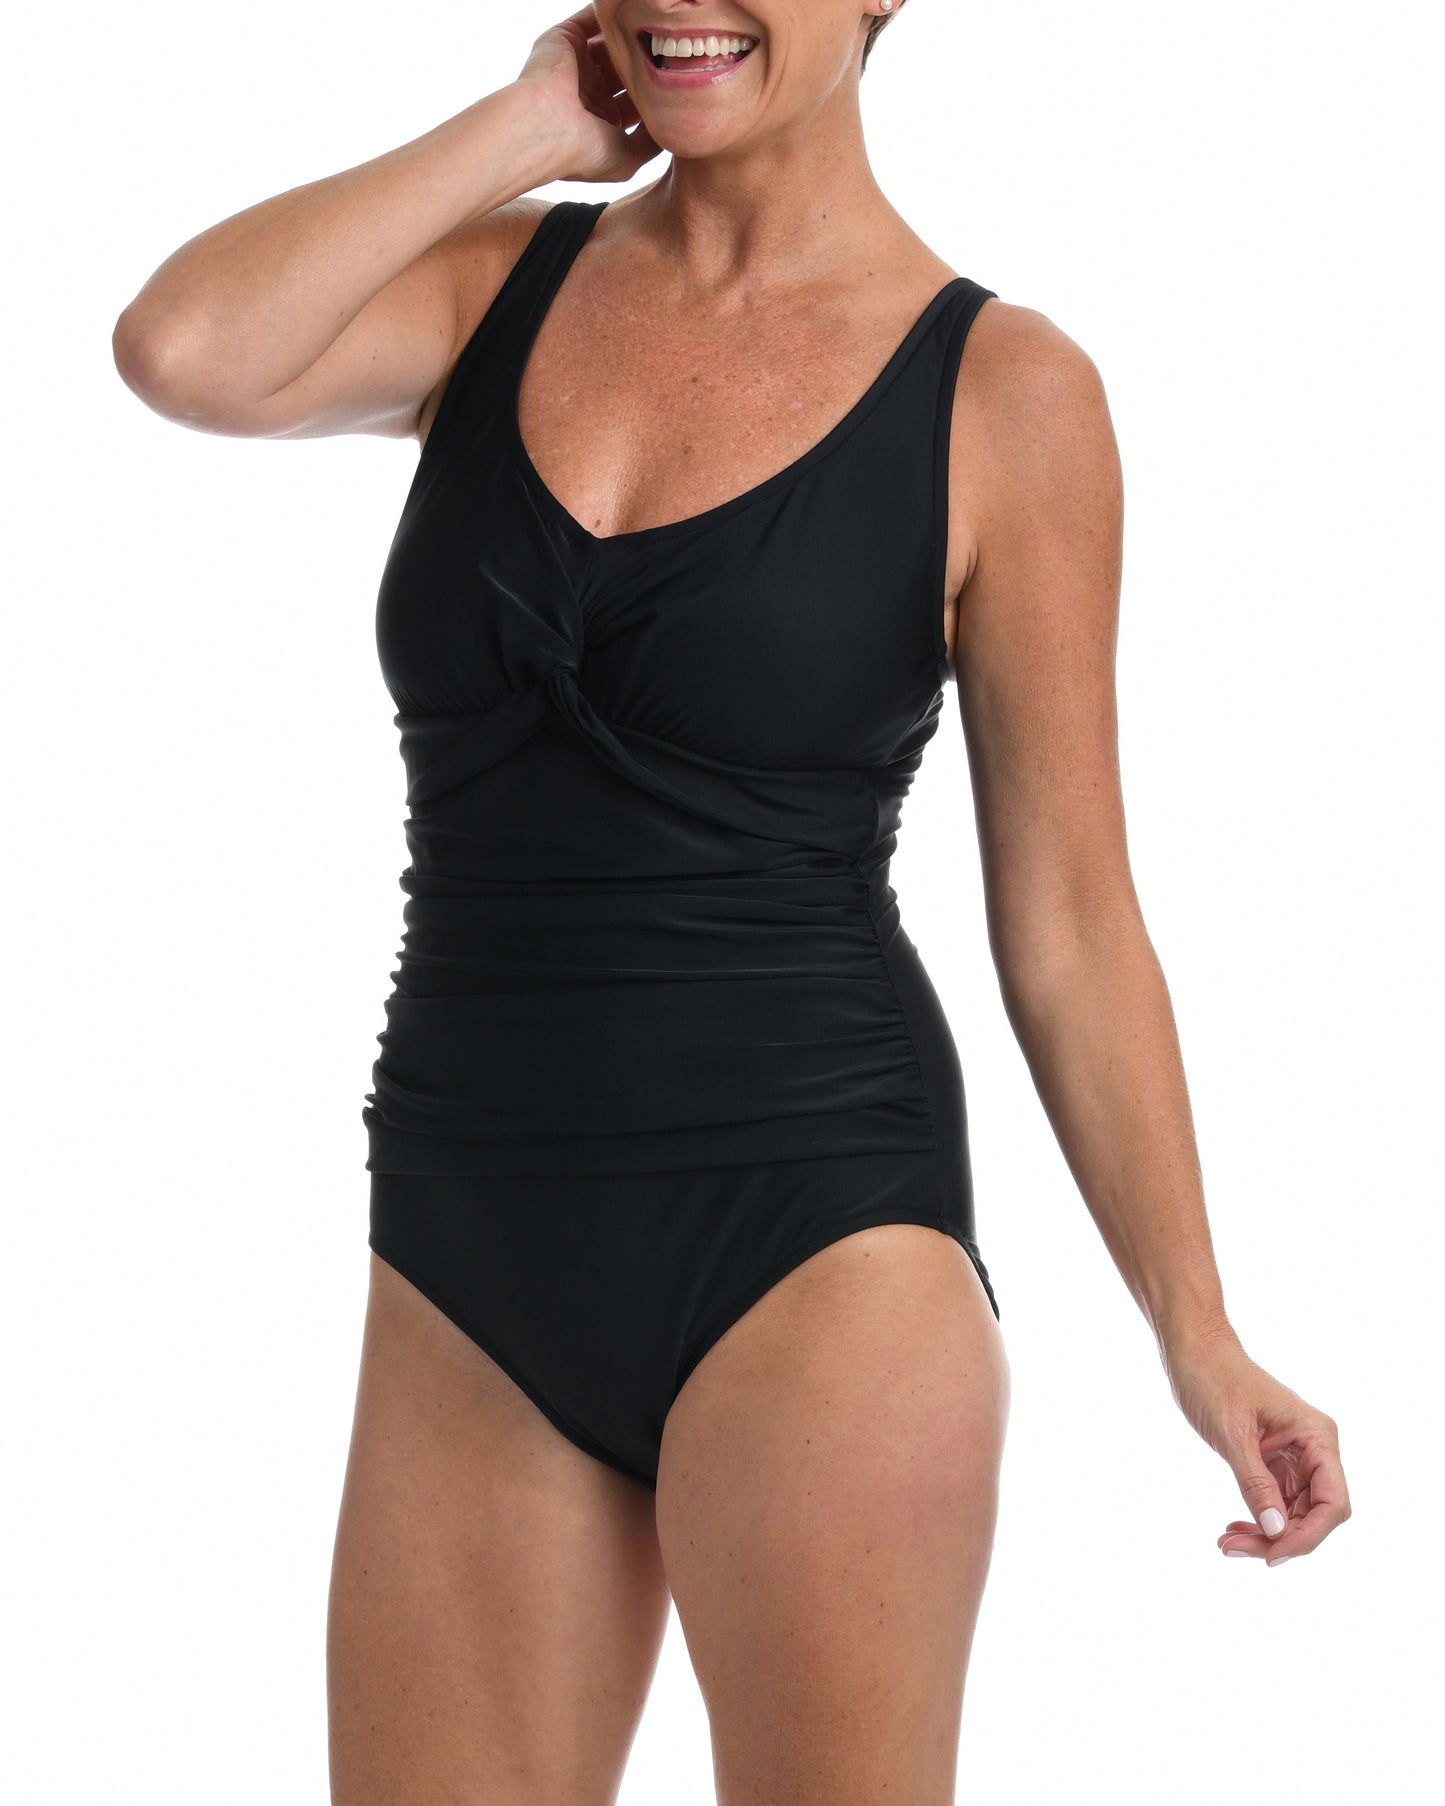 Model wearing a one piece swimsuit with a twist front detail in black